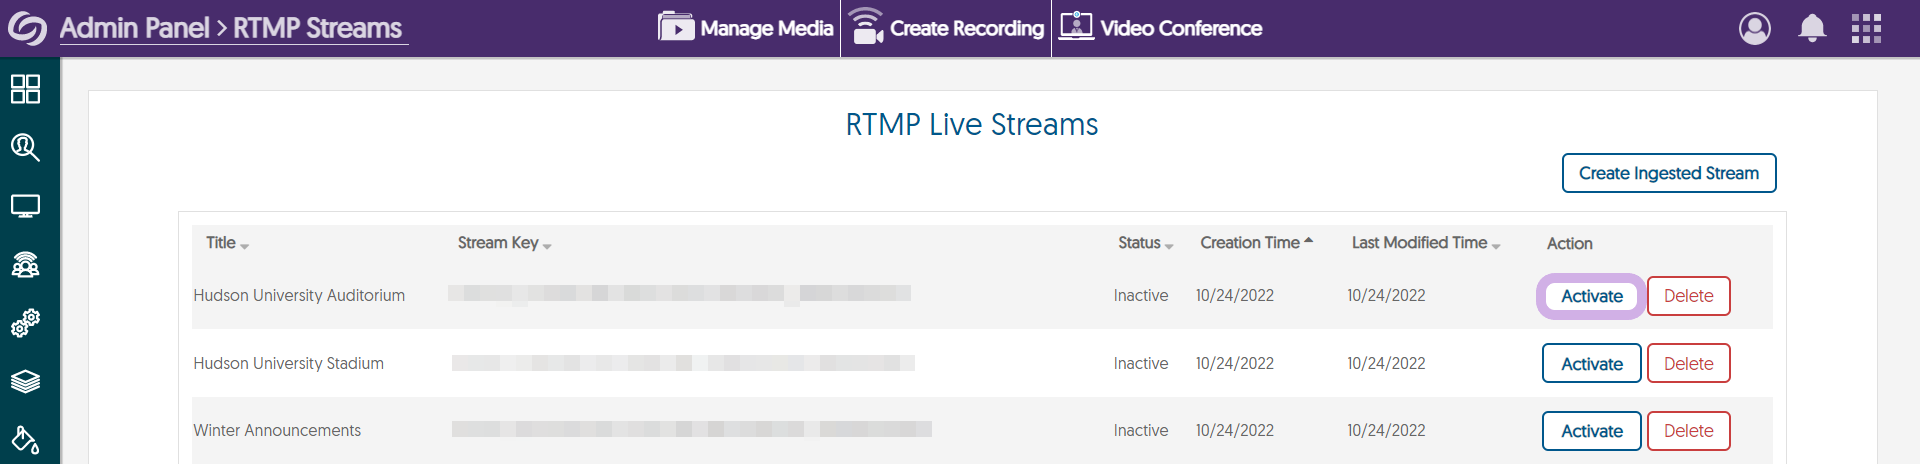 RTMP Live Streams shown with the Active button highlighted.